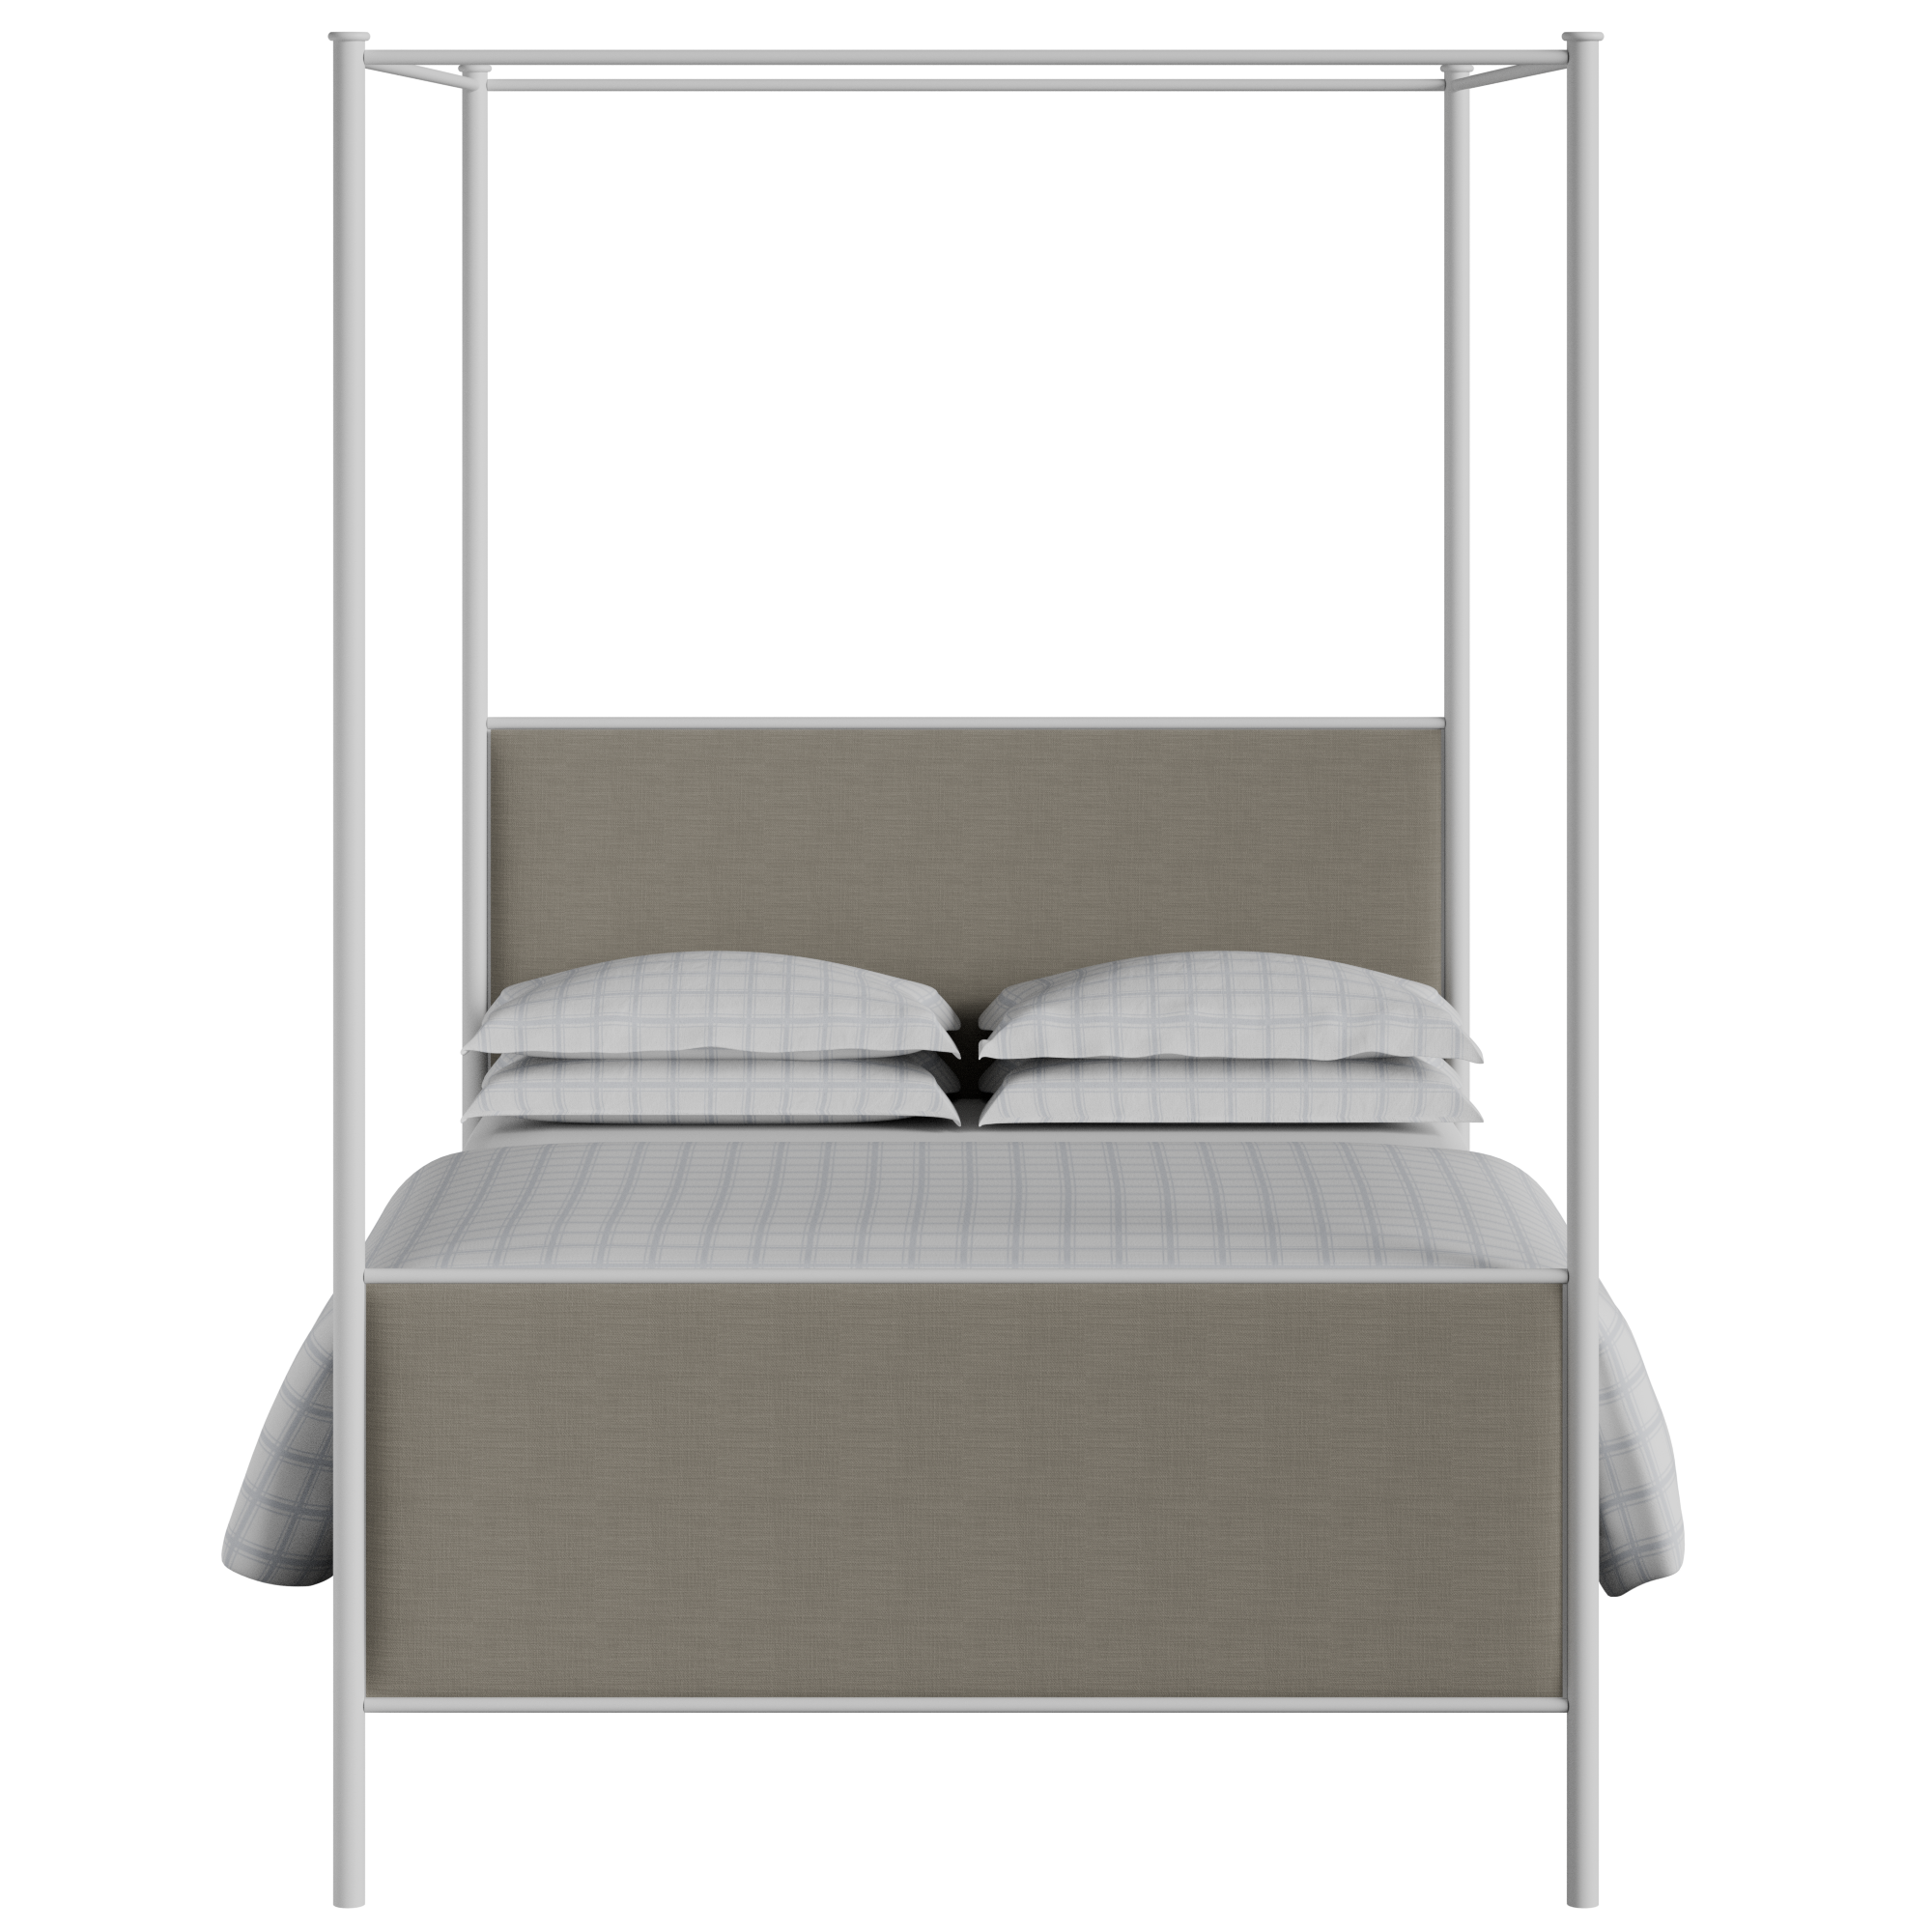 Reims iron/metal upholstered bed in white with grey fabric